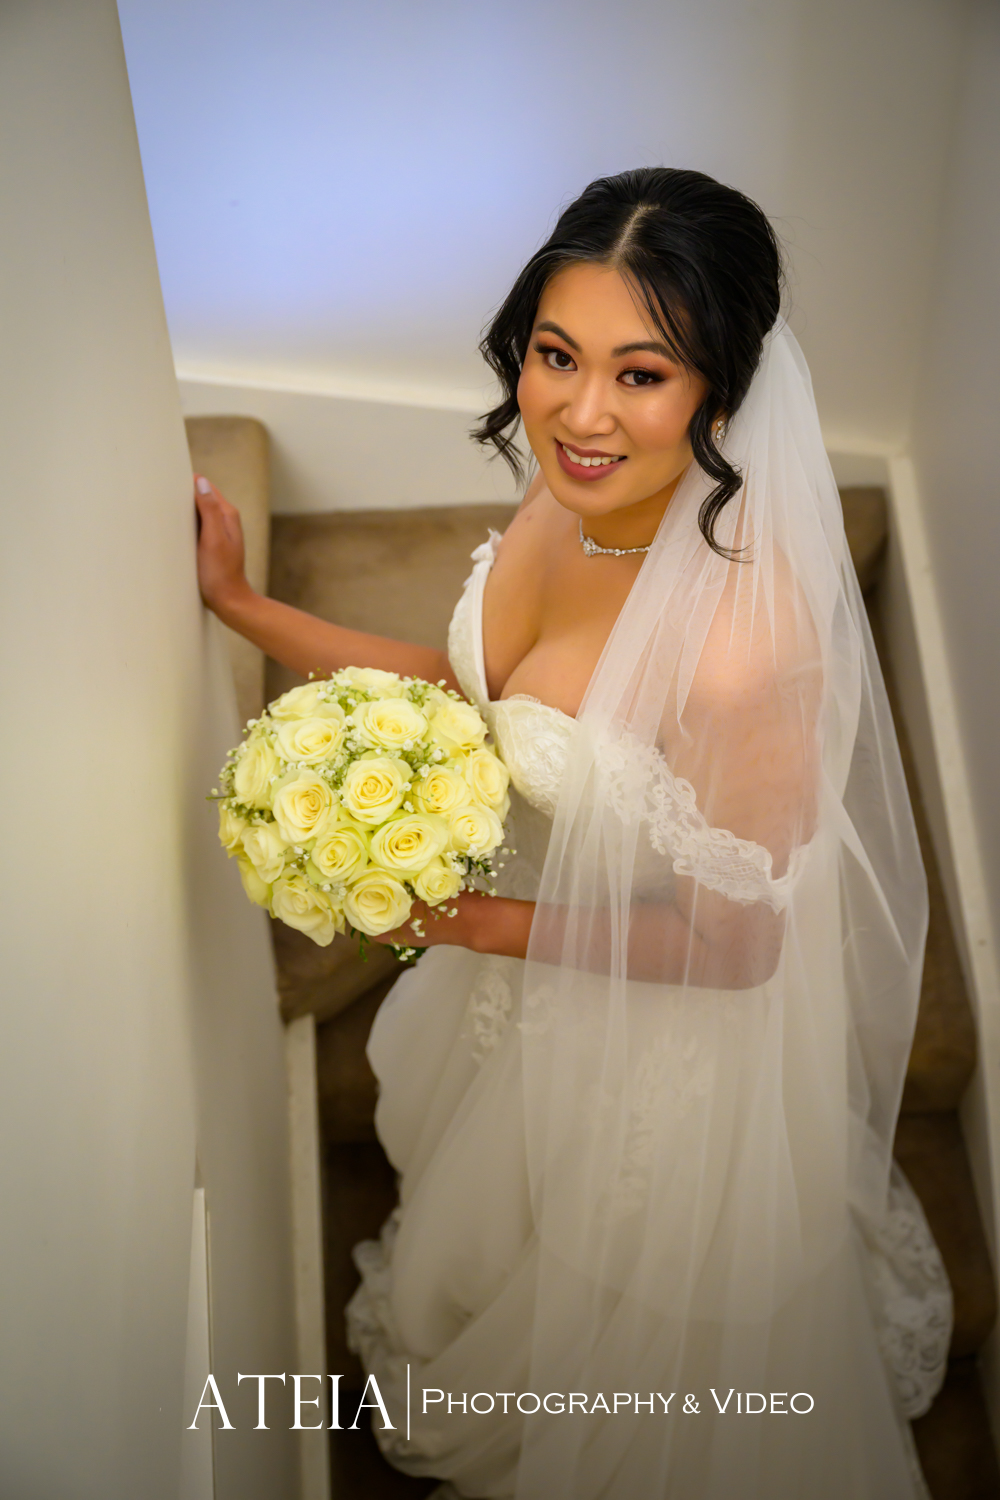 , Anh and Stephen&#8217;s wedding at Pier 35 Port Melbourne captured by ATEIA Photography &#038; Video